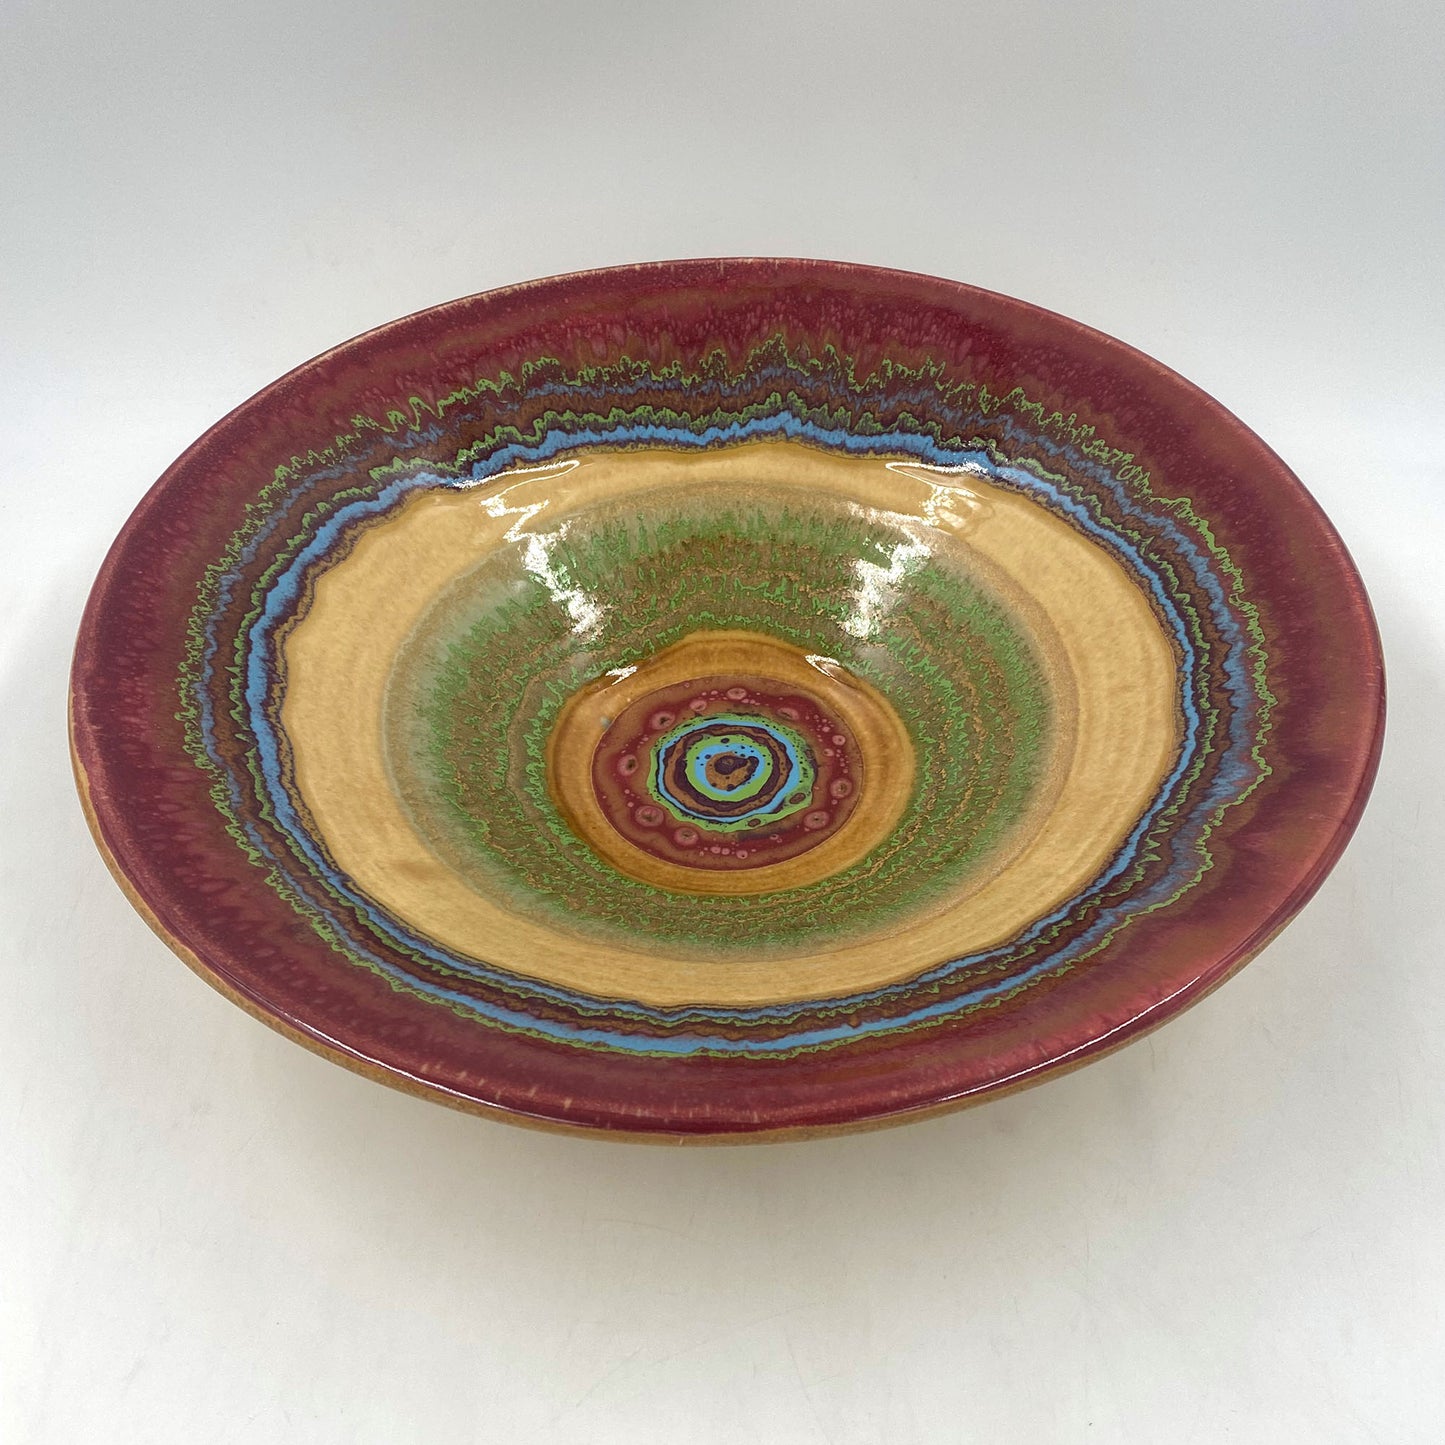 Spanish Conical Bowl